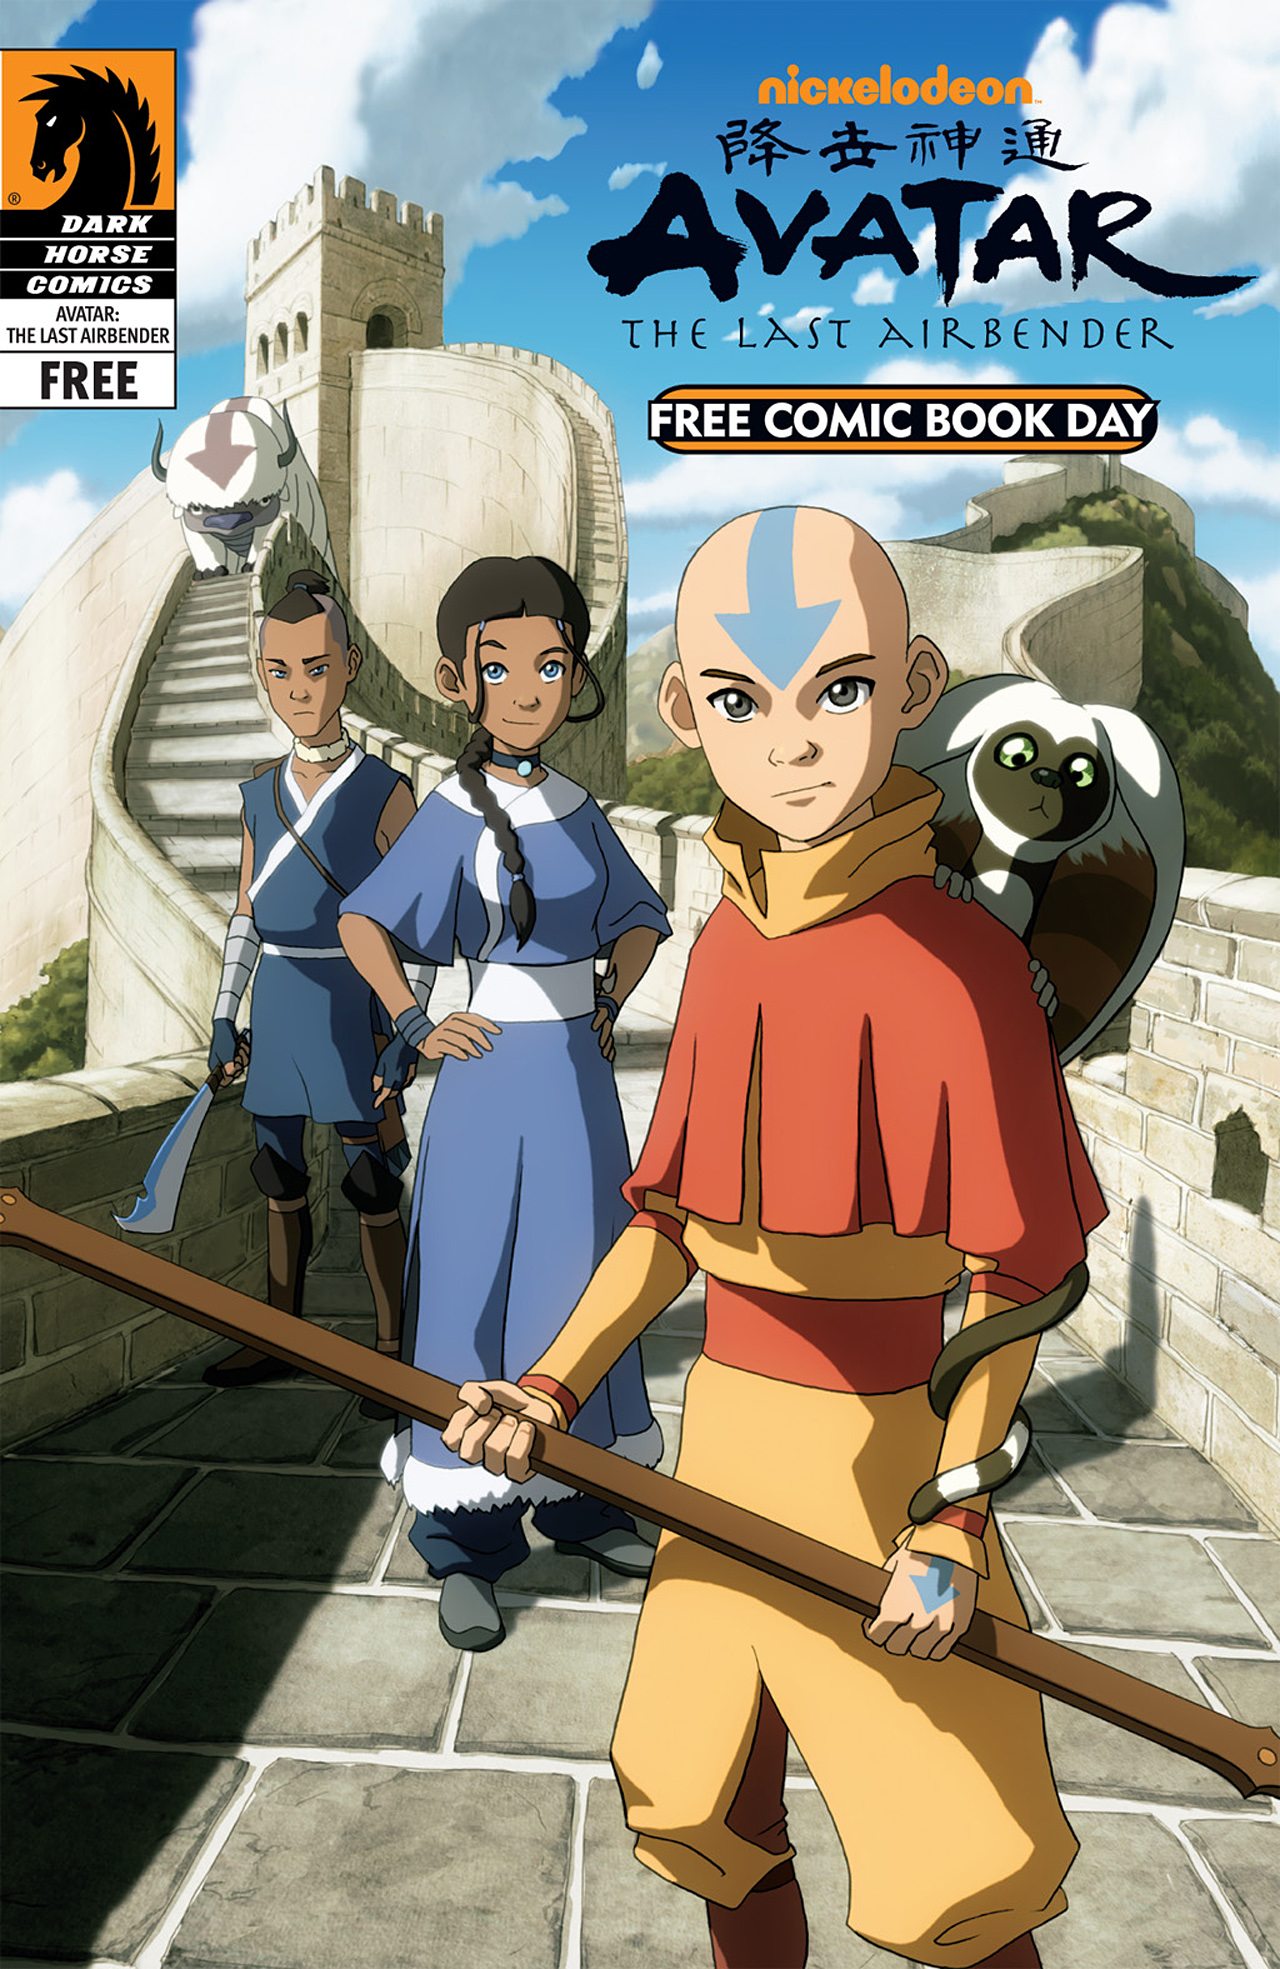 Read online Free Comic Book Day and Nickelodeon Avatar: The Last Airbender comic -  Issue # Full - 1